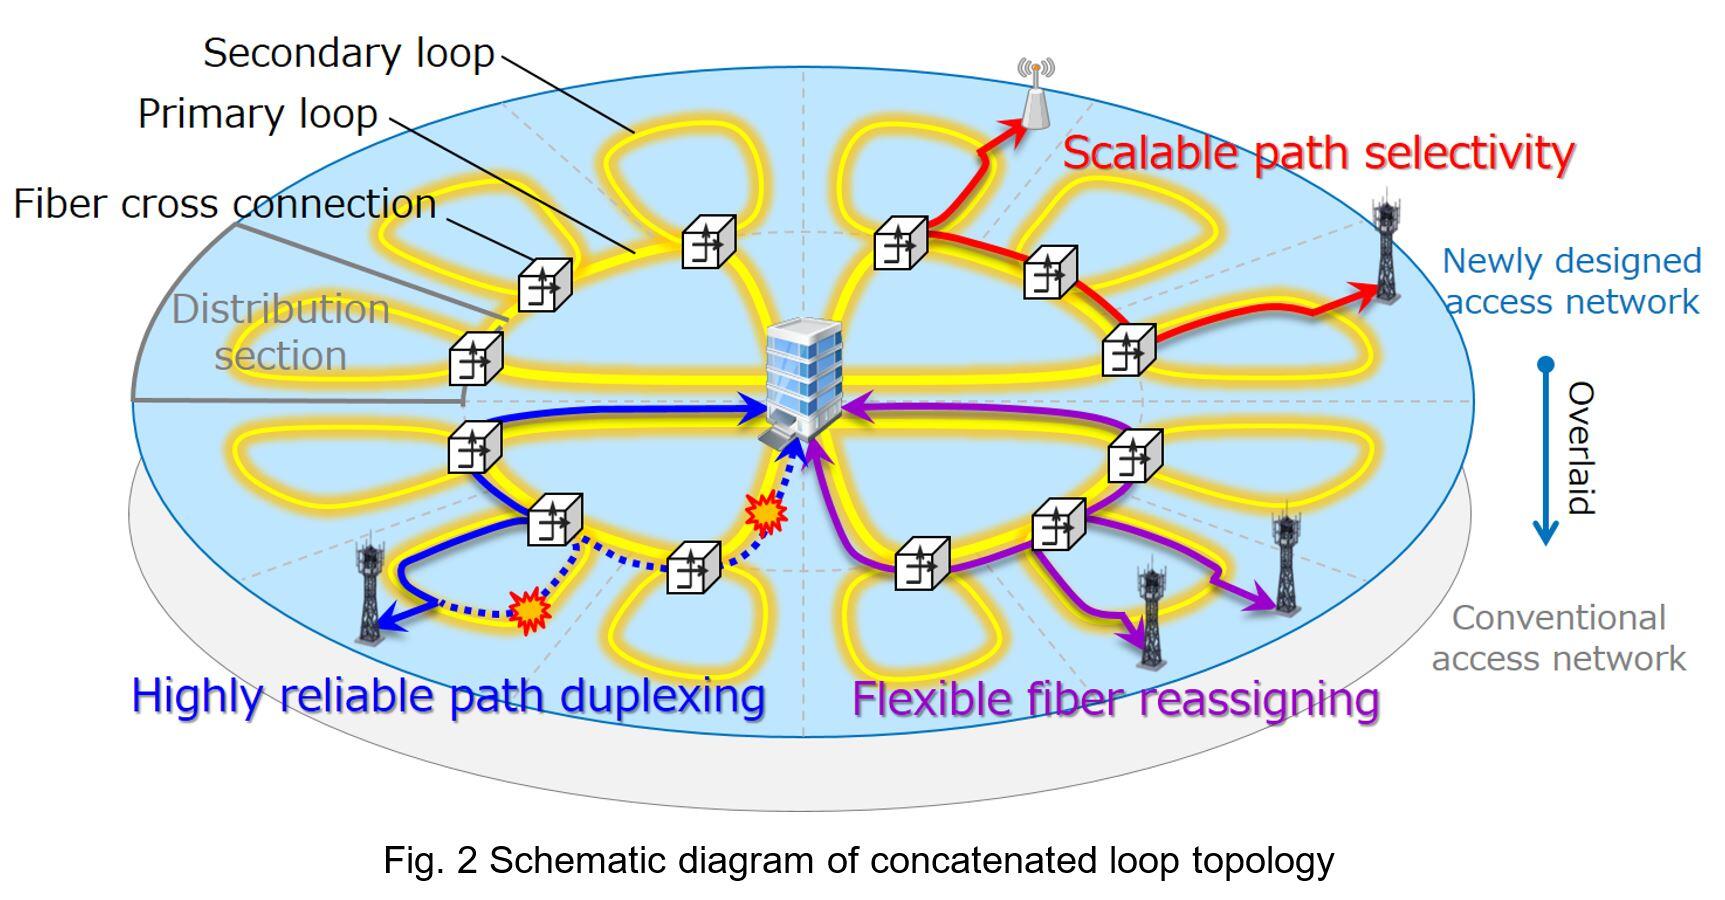 Fig. 2 Schematic diagram of concatenated loop topology